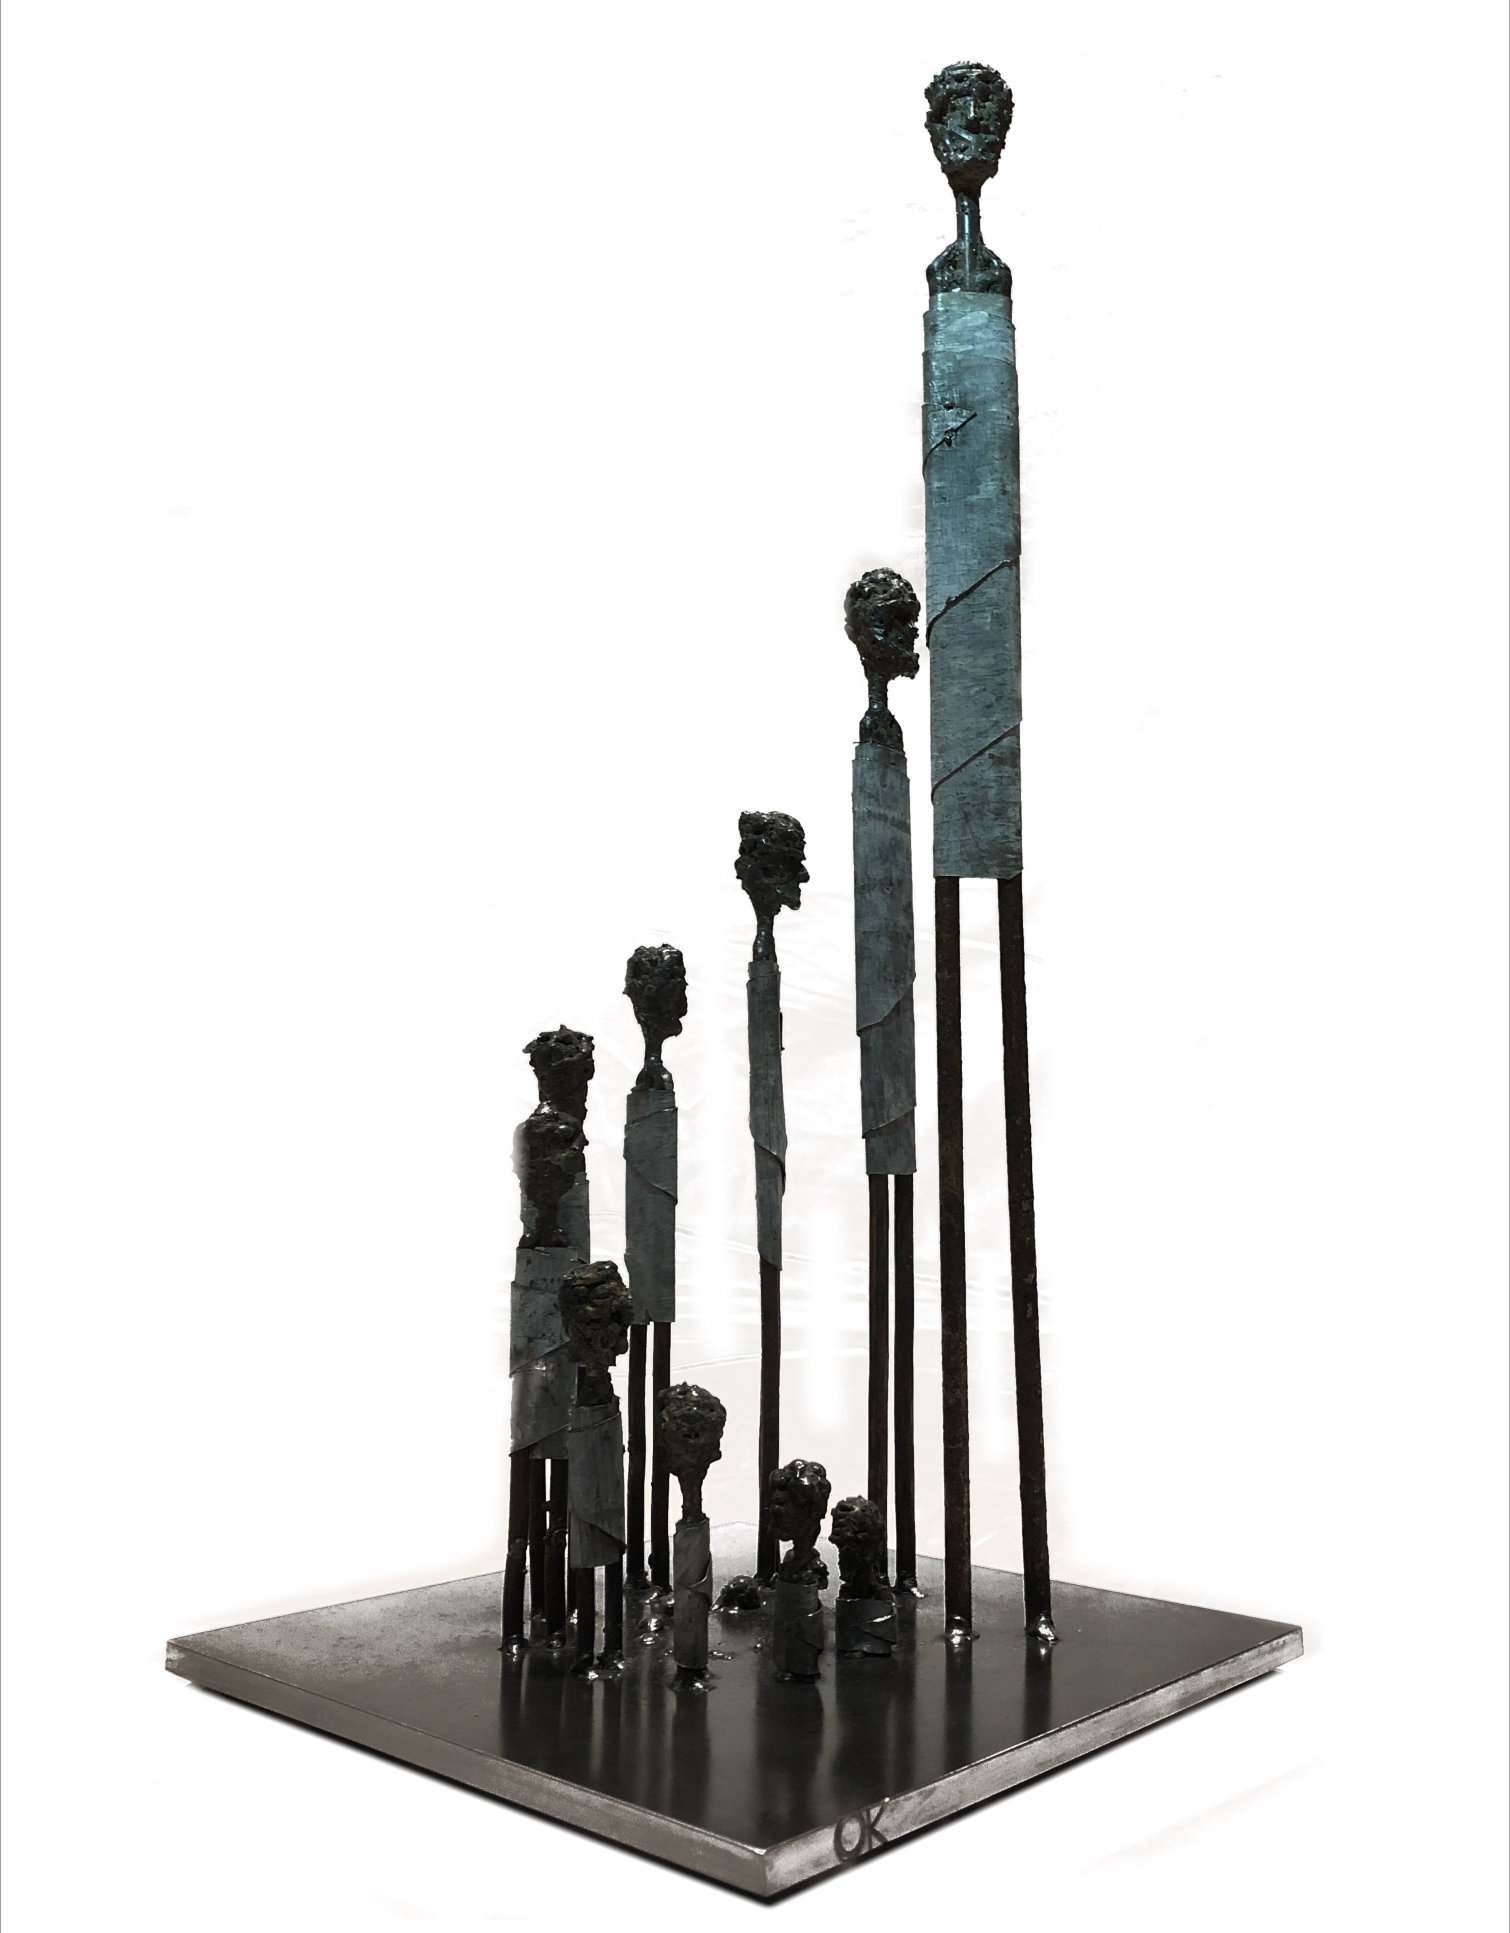 Steel sculpture by Tony O'Keefe. New Zealand artist. Made of recycled steel.